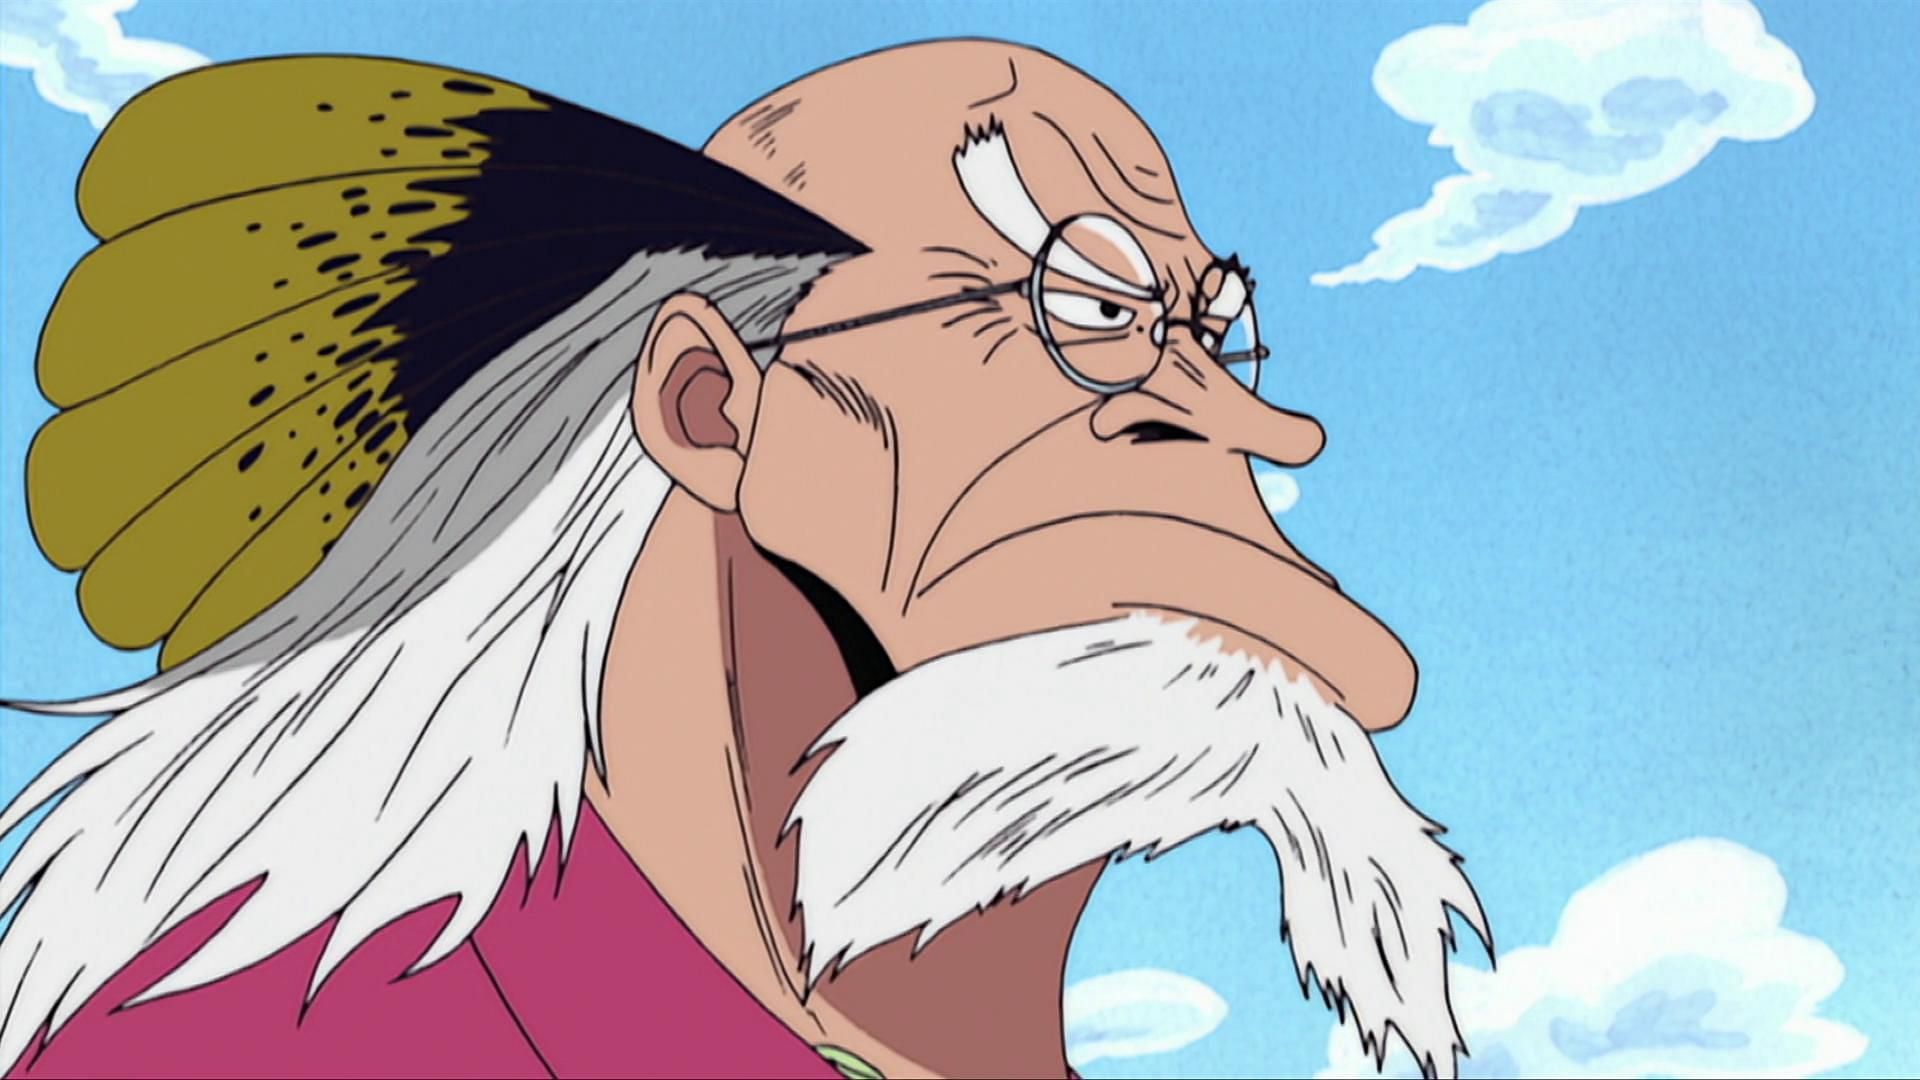 An aged Crocus as seen in One Piece (Image via Toei Animation, One Piece)